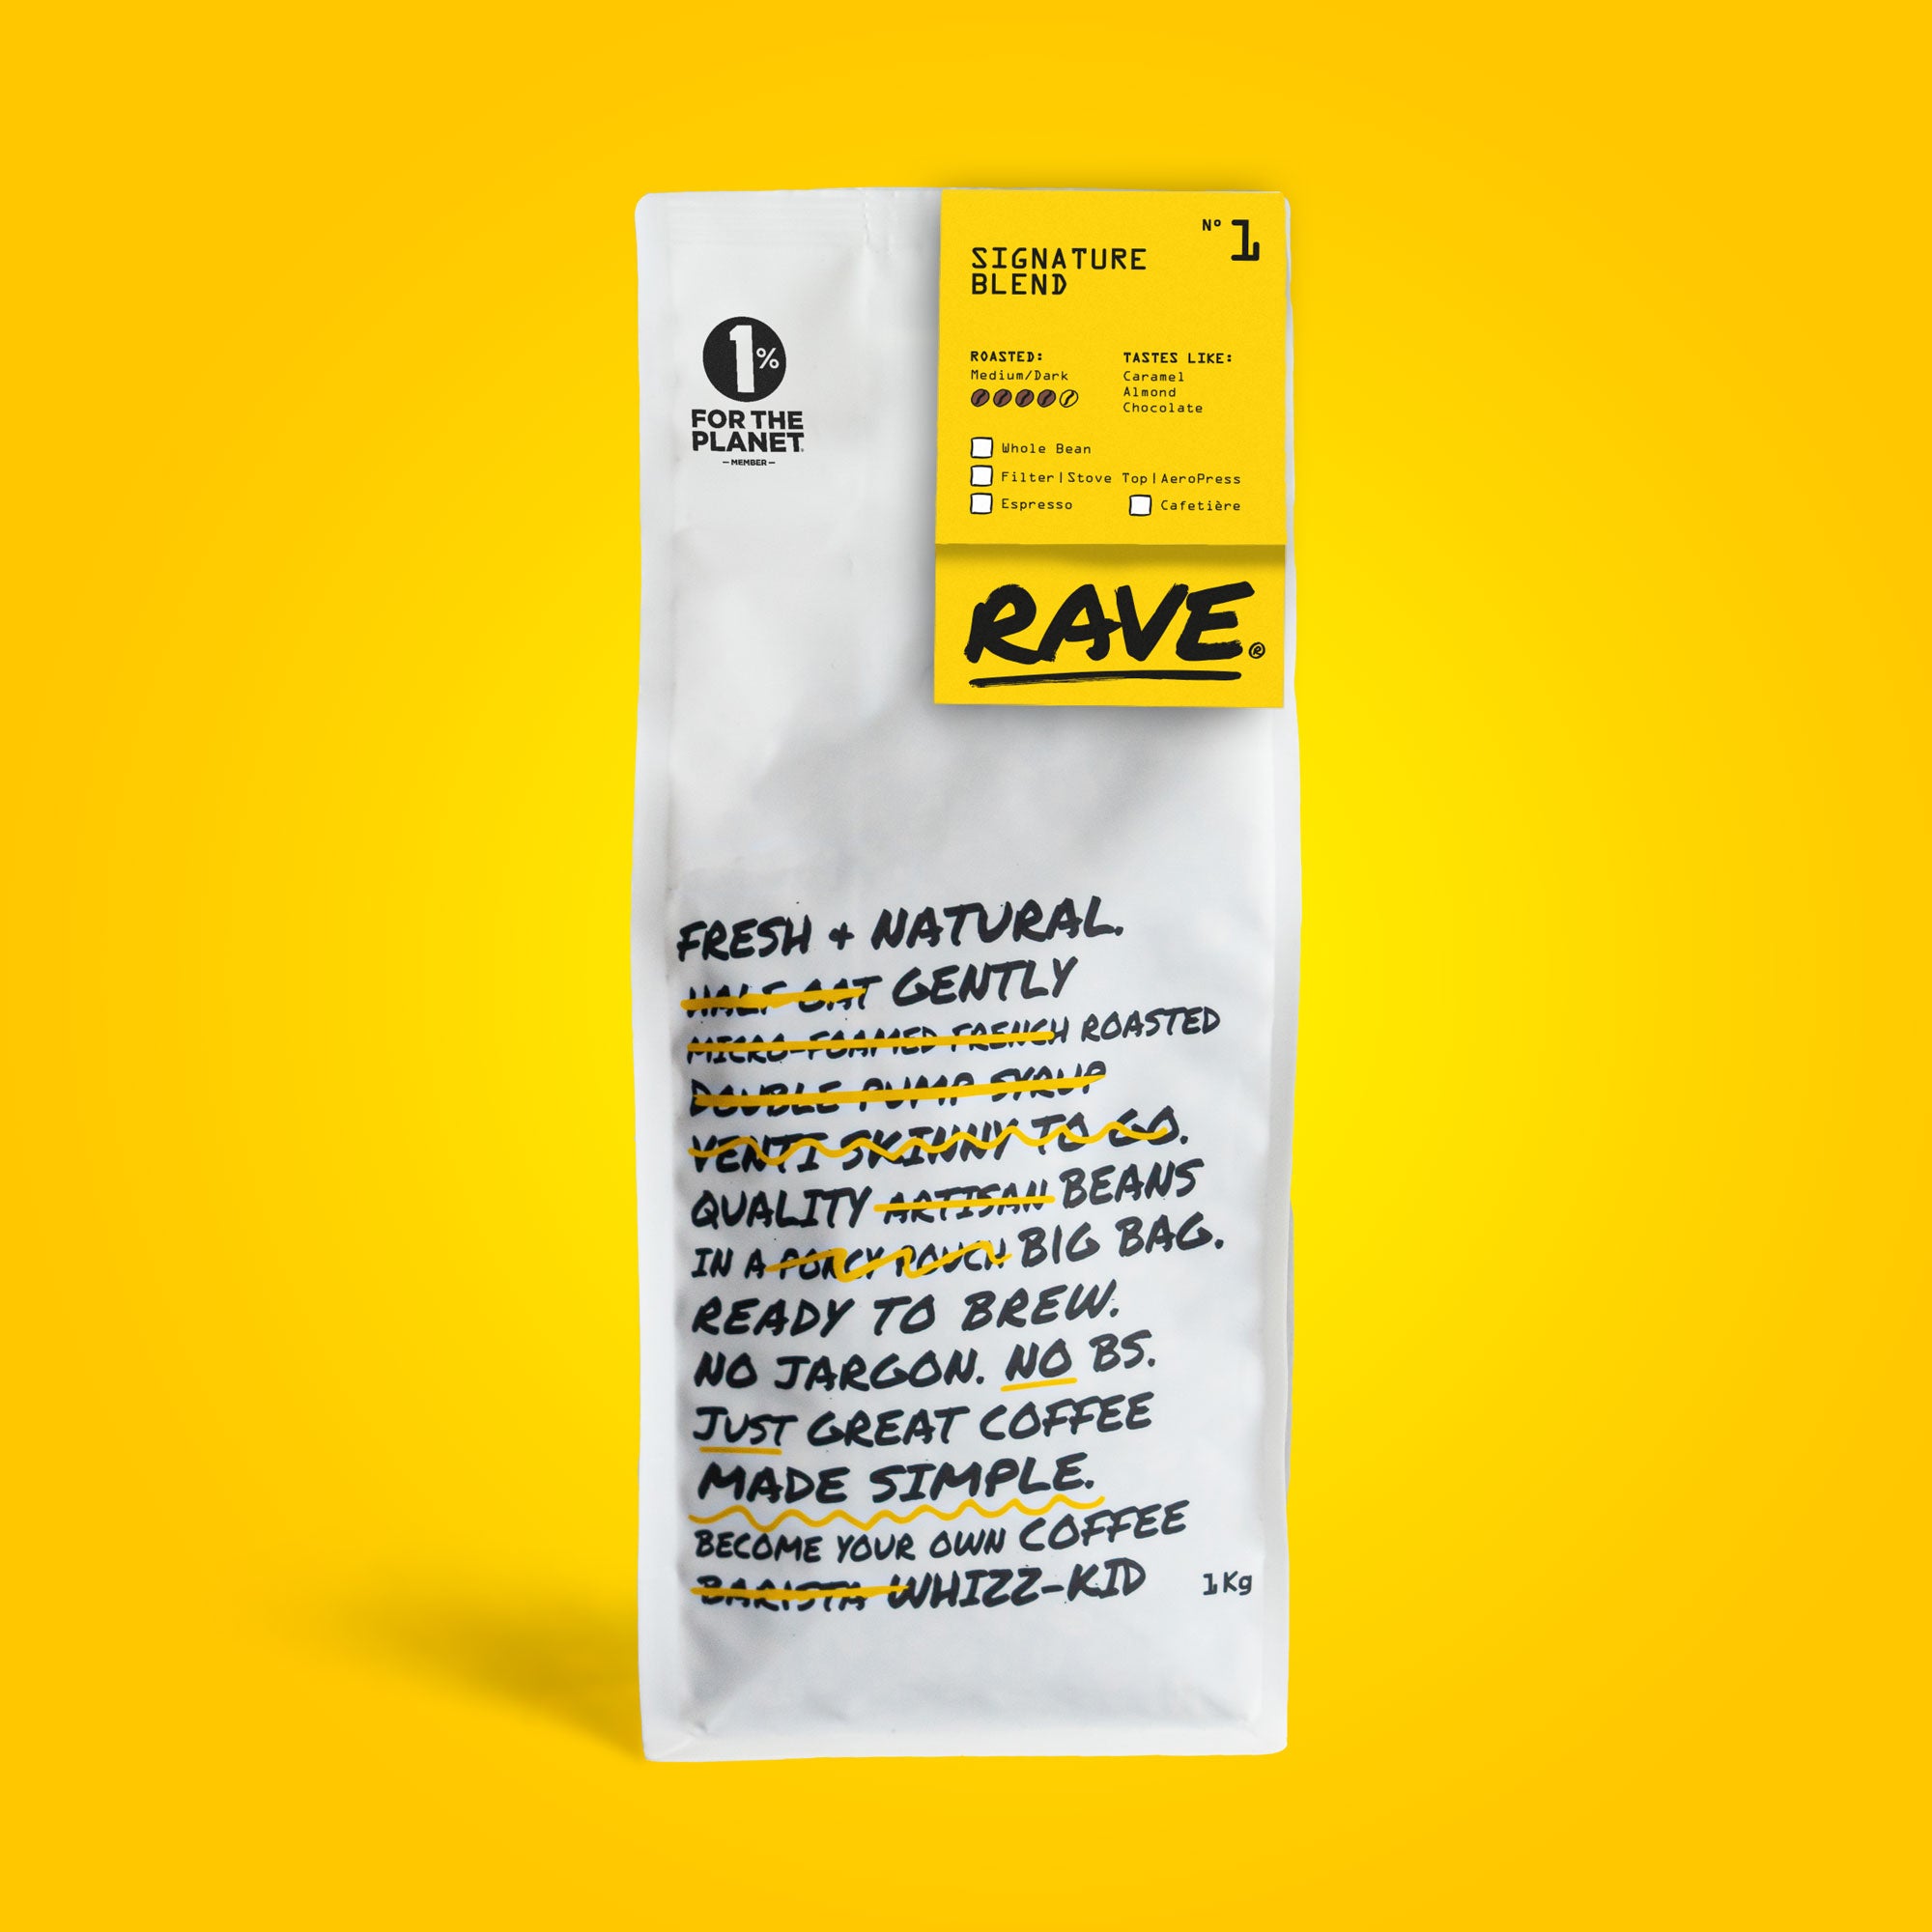 Rave Coffee - Signature Blend Freshly Roasted Whole Beans Coffee